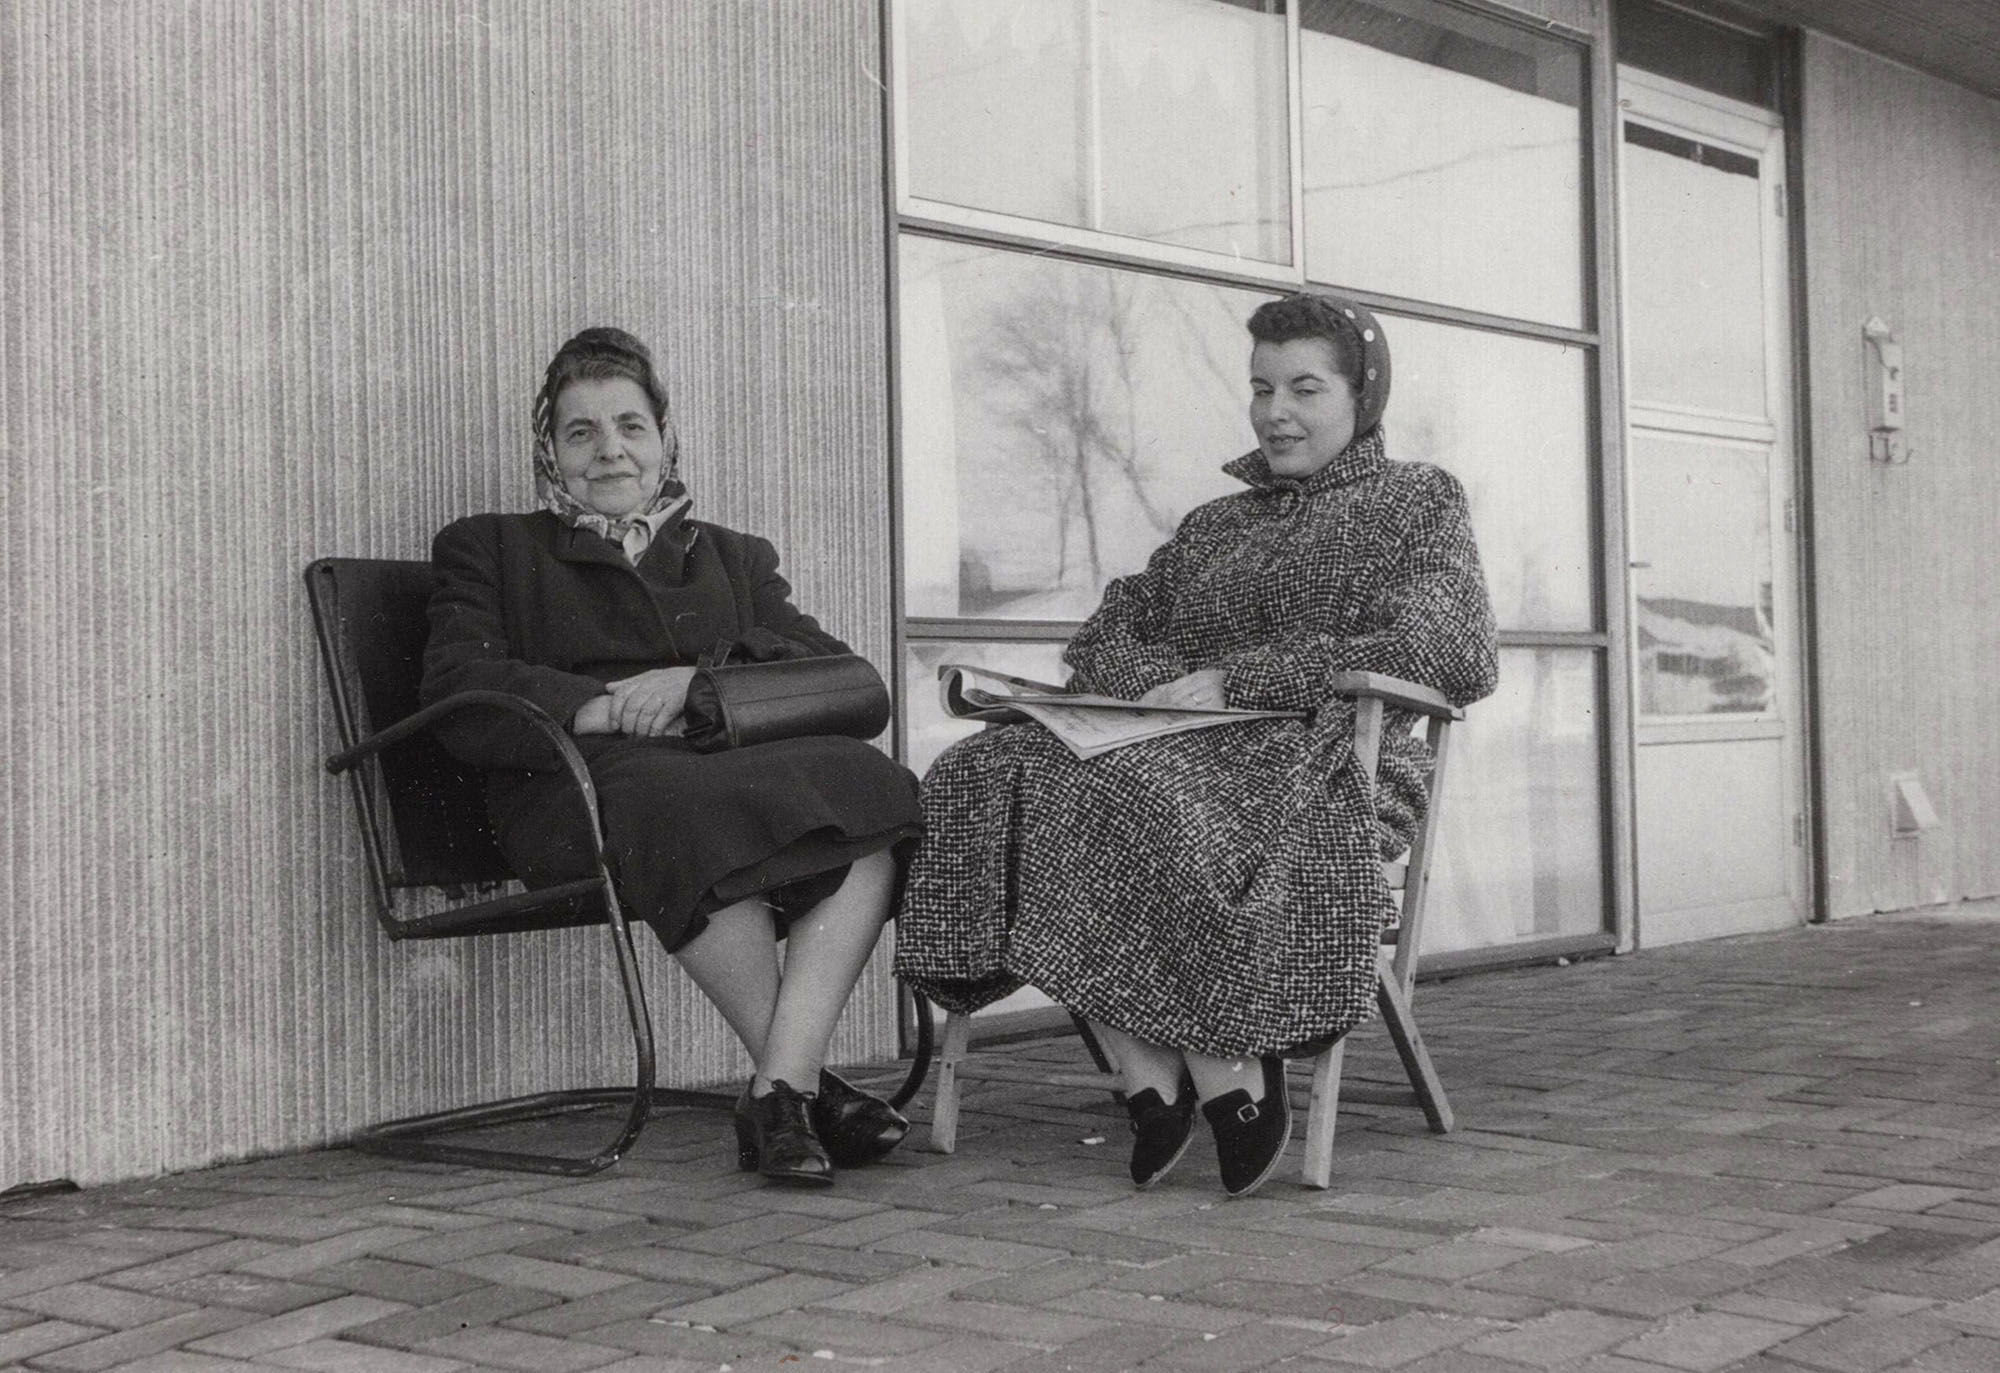 My mother sits with her mother on what must have been a chilly day in the Dogwood section of Levittown, Pennsylvania. They were enjoying the new front porch that my father built out of stones, sand and bricks.

The siding behind them was red and white and made of asbestos. On a 2018 drive through Levittown I could only see one house where this type of siding was still visible, while on others it could be hidden beneath newer siding.